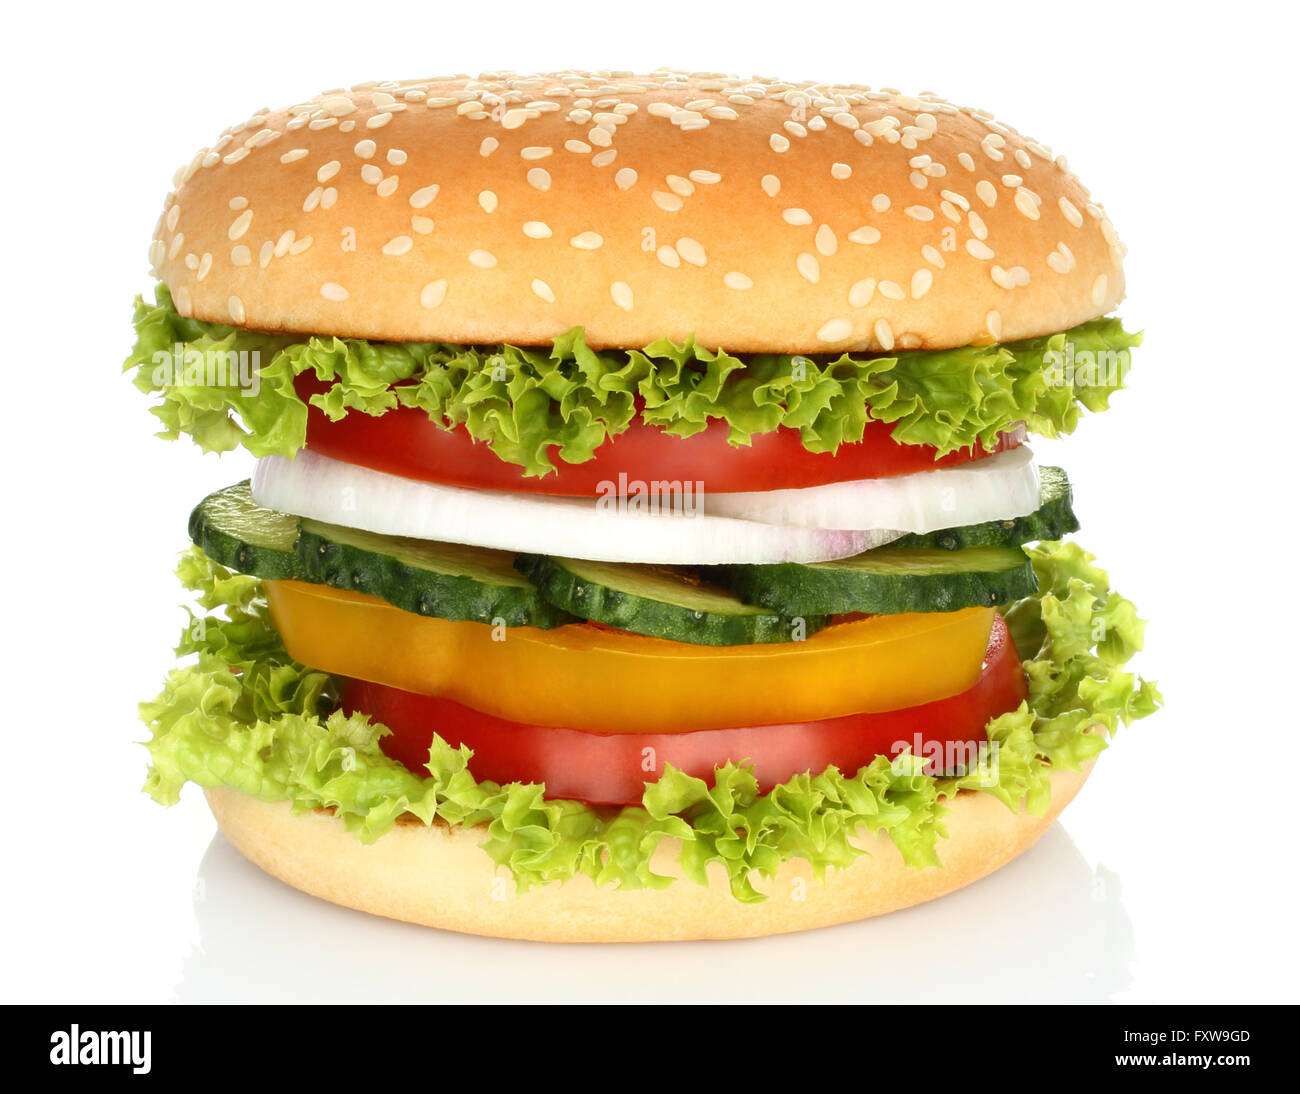 Healthy vegan burger with raw vegetables on white background Stock Photo